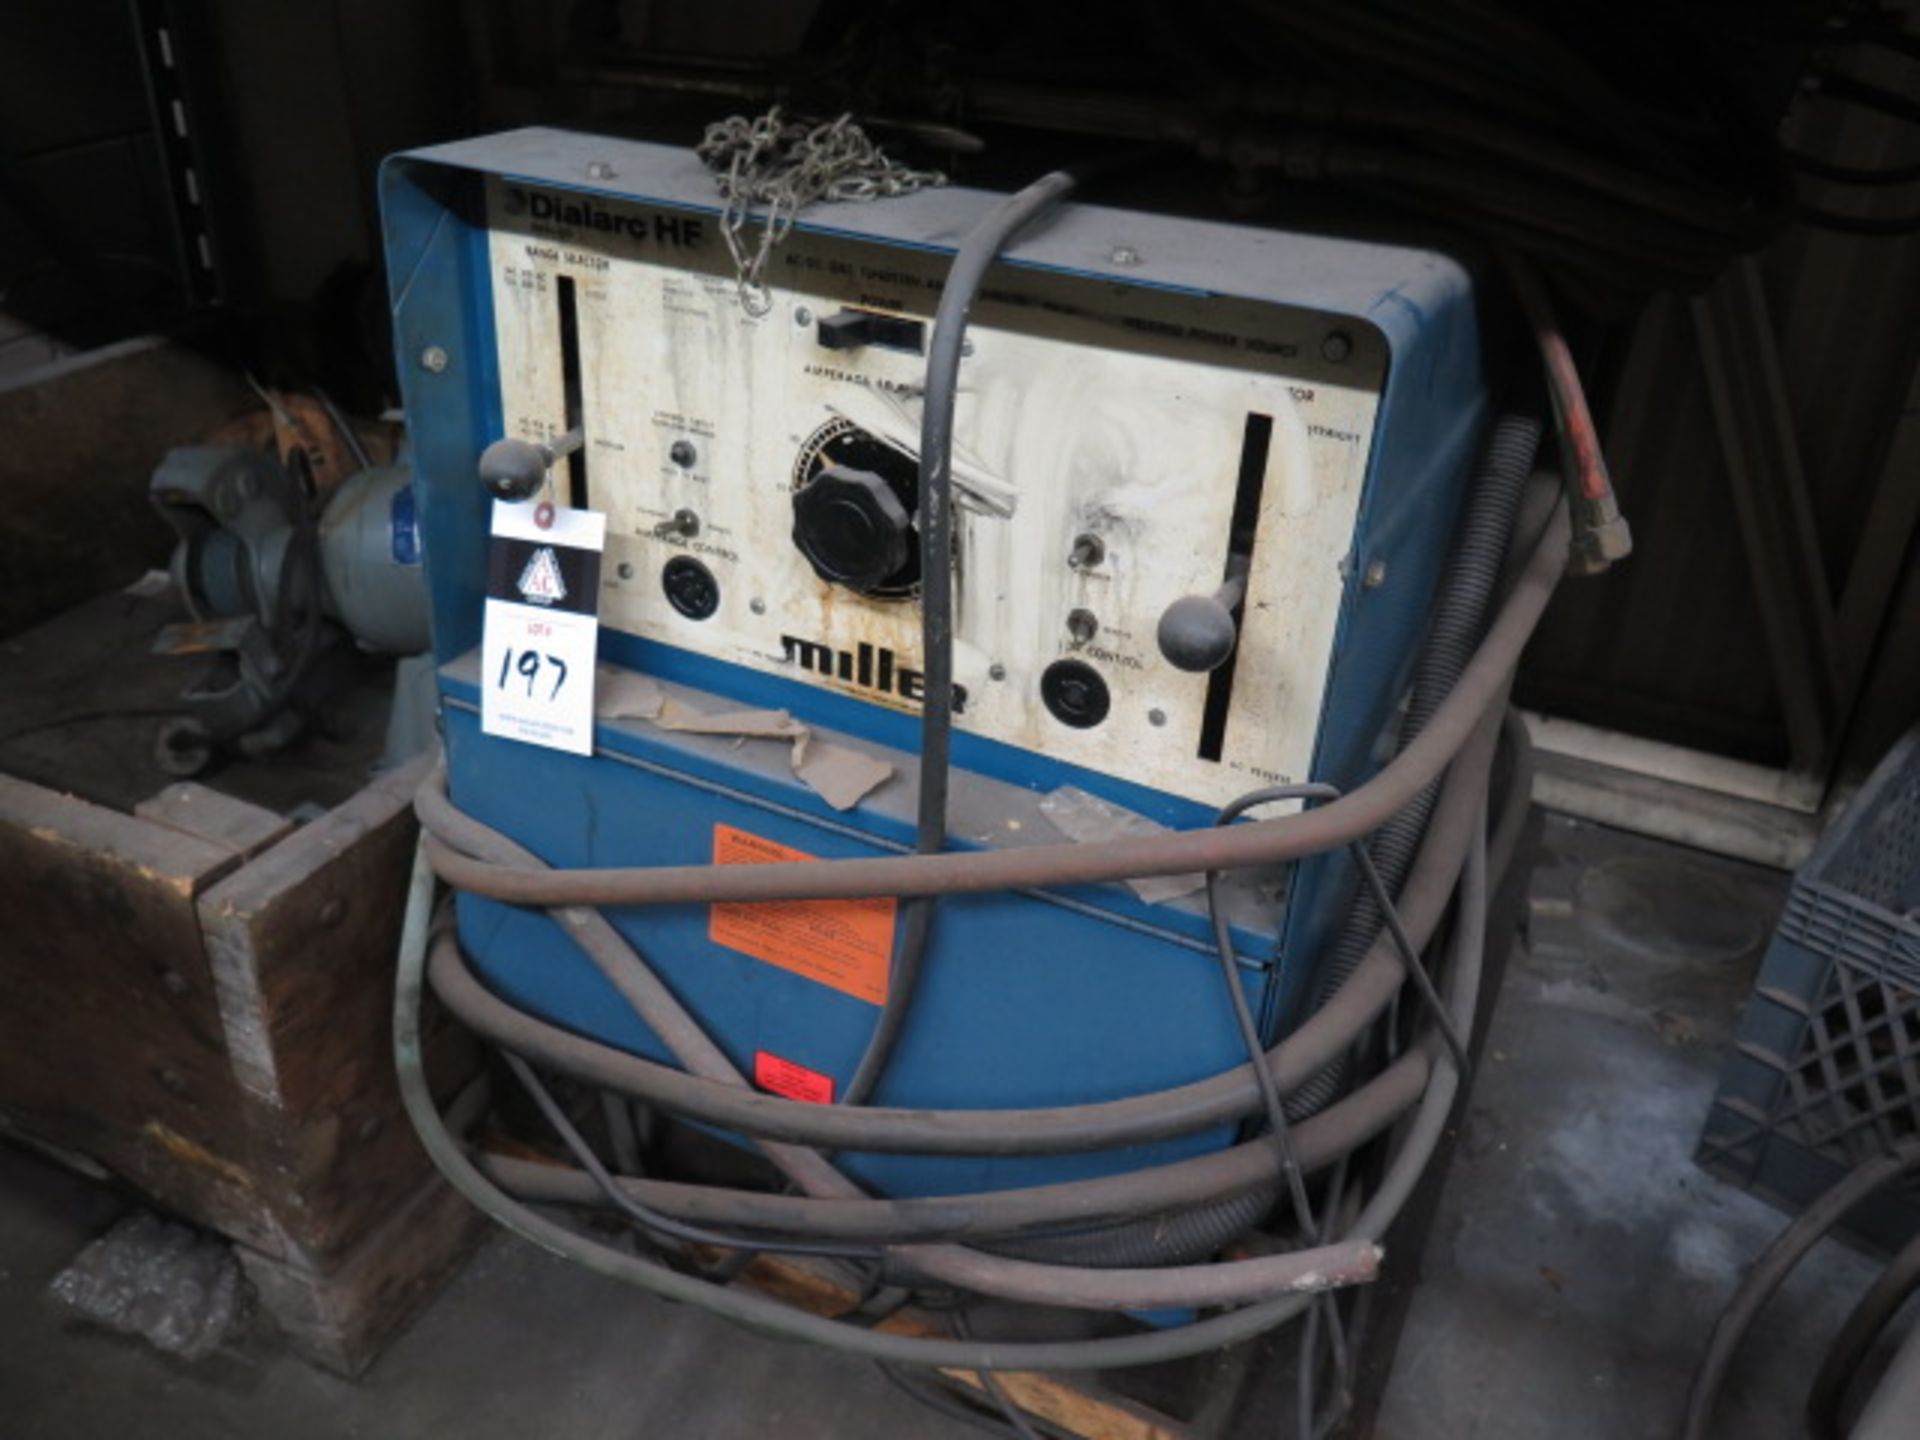 Miller Dial Arc HF Arc Welding Power Source (SOLD AS-IS - NO WARRANTY)